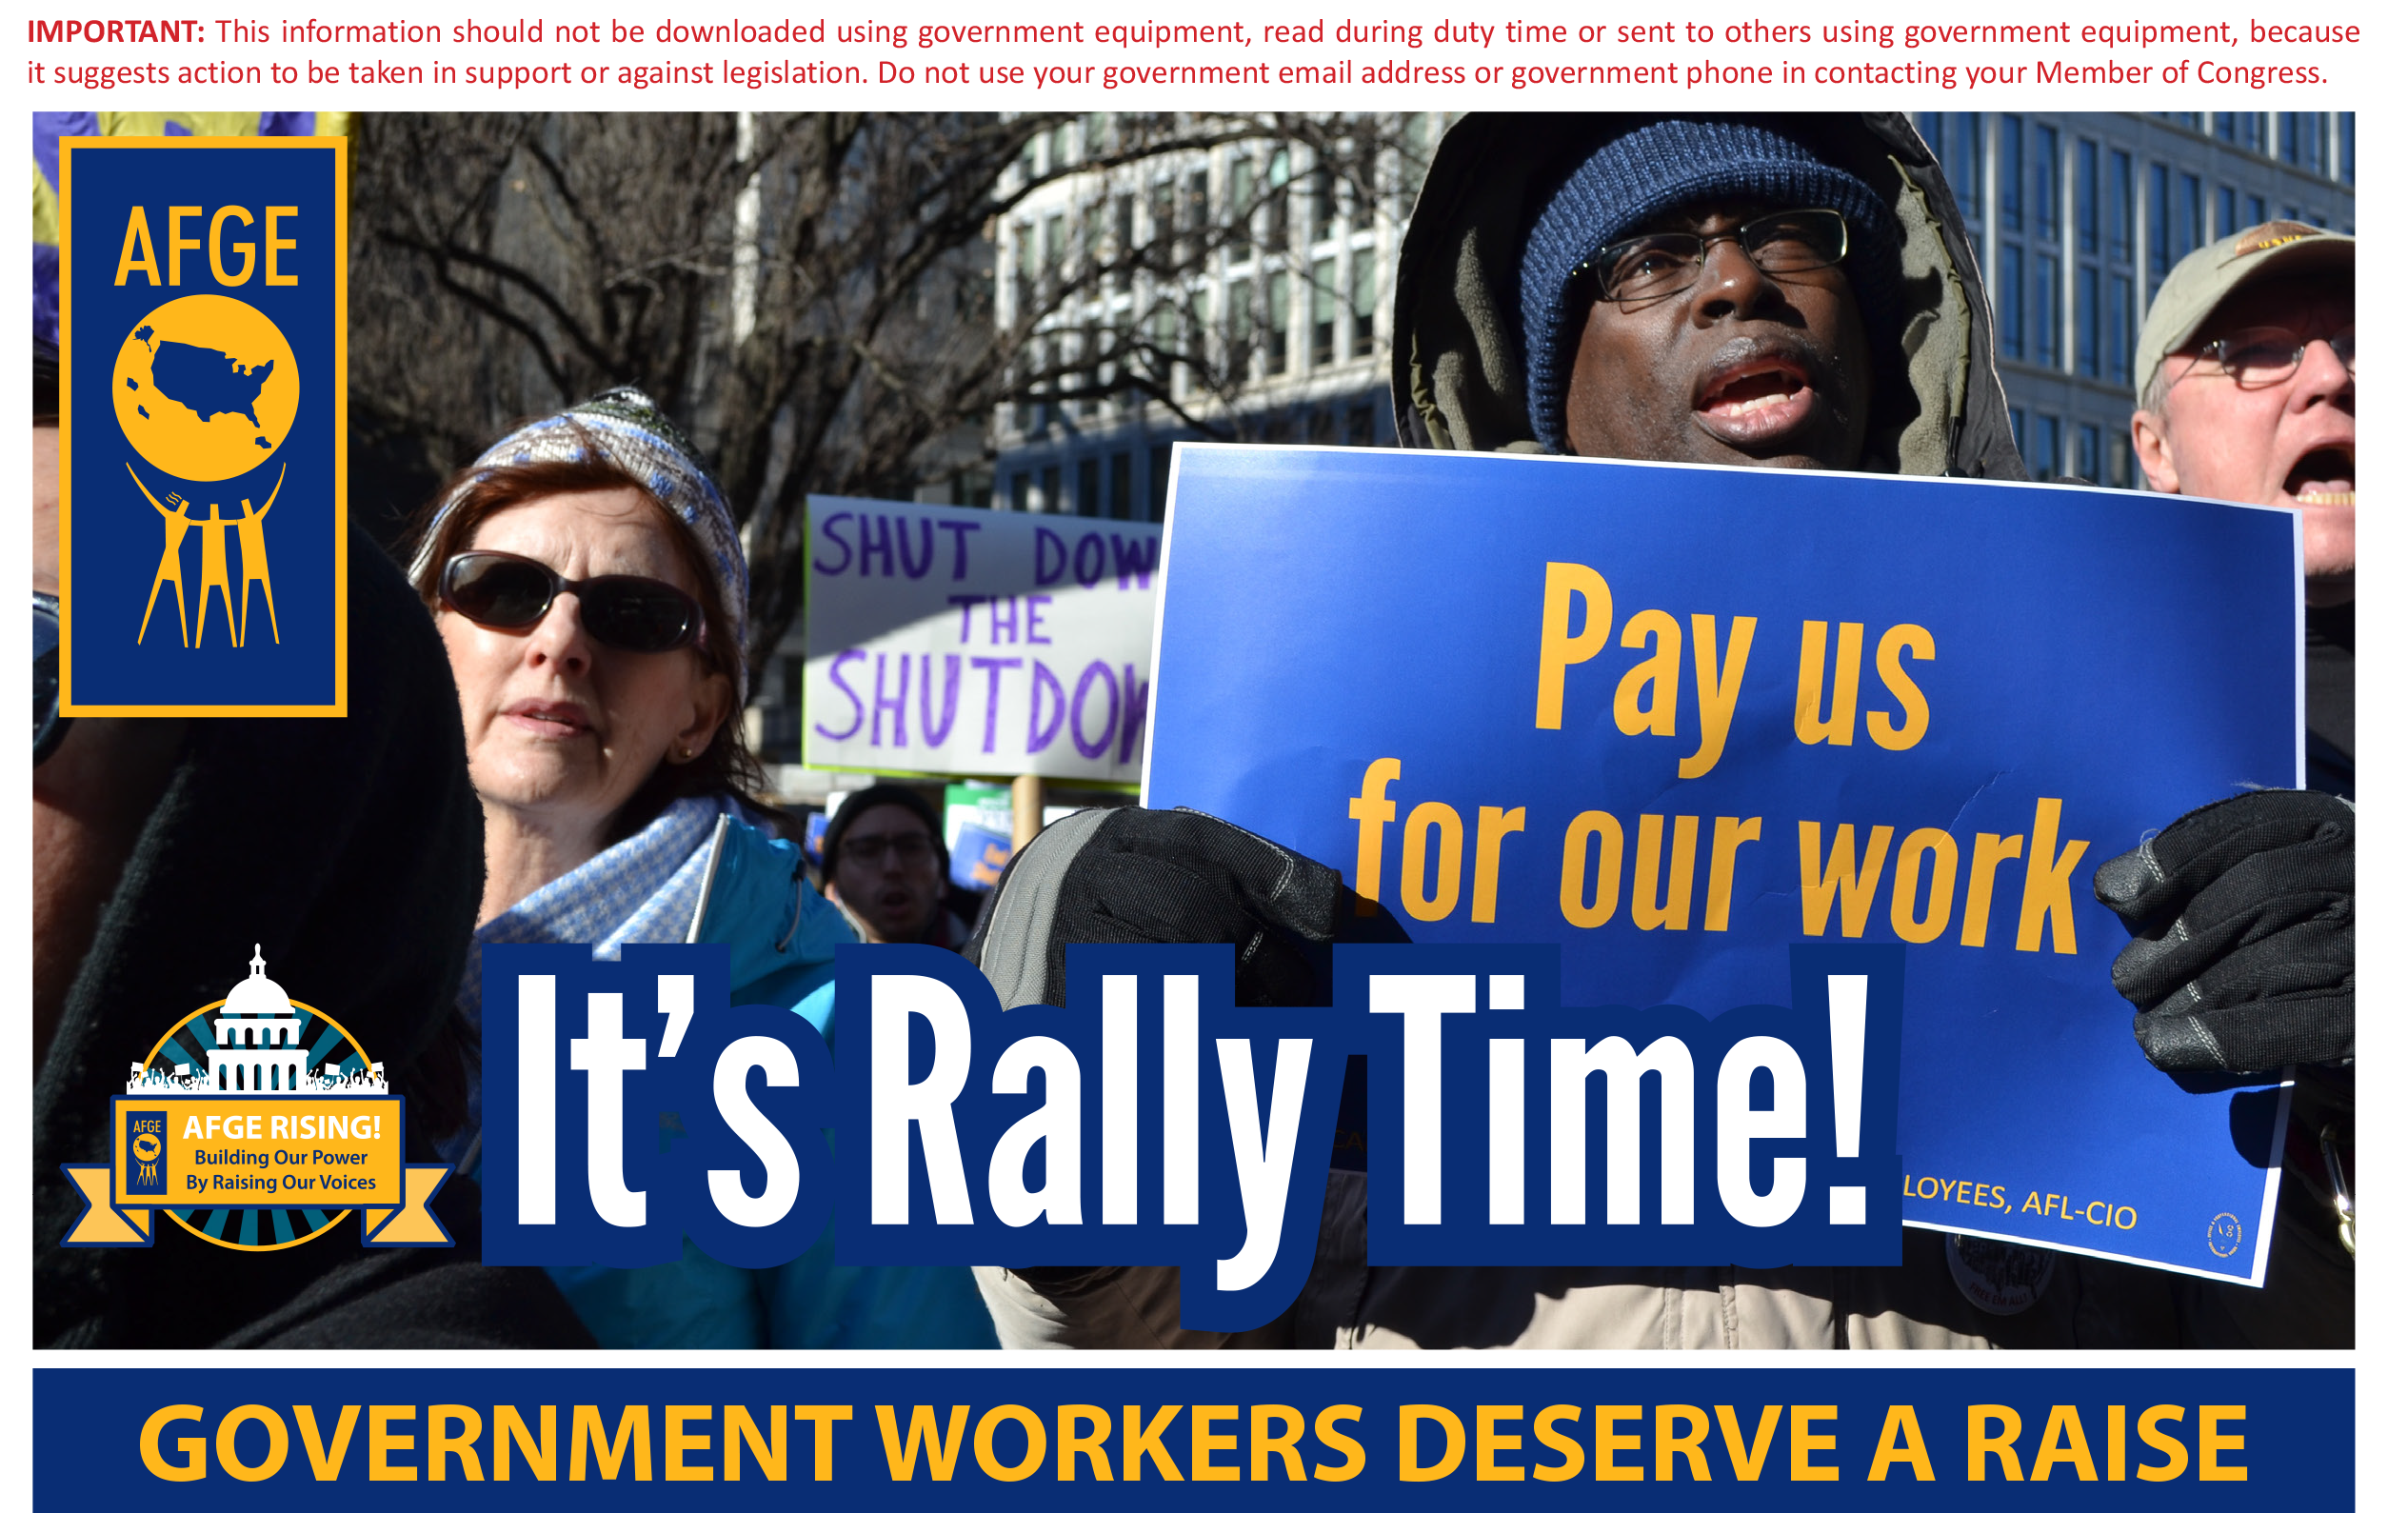 This information should not be downloaded using government equipment, read during duty time or sent to others using government equipment, because it suggests action to be taken in support or against legislation. Do not use your government email address or government phone in contacting your member of Congress. It’s Rally Time! Government workers deserve a raise.